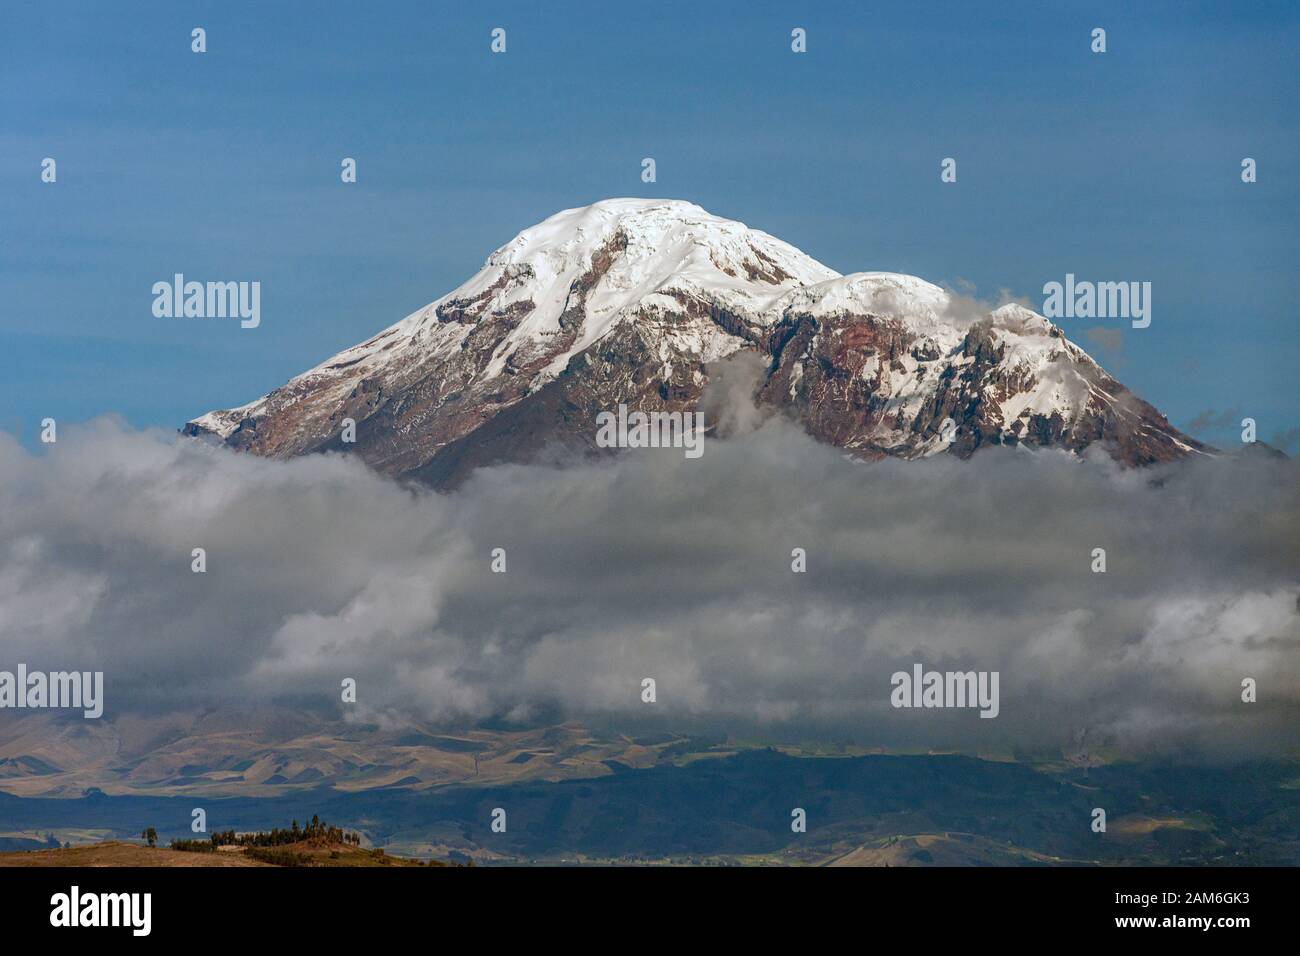 Mount Chimborazo volcano (6268m), the highest mountain in Ecuador and the highest point on Earth when measured from the centre of the Earth. Stock Photo